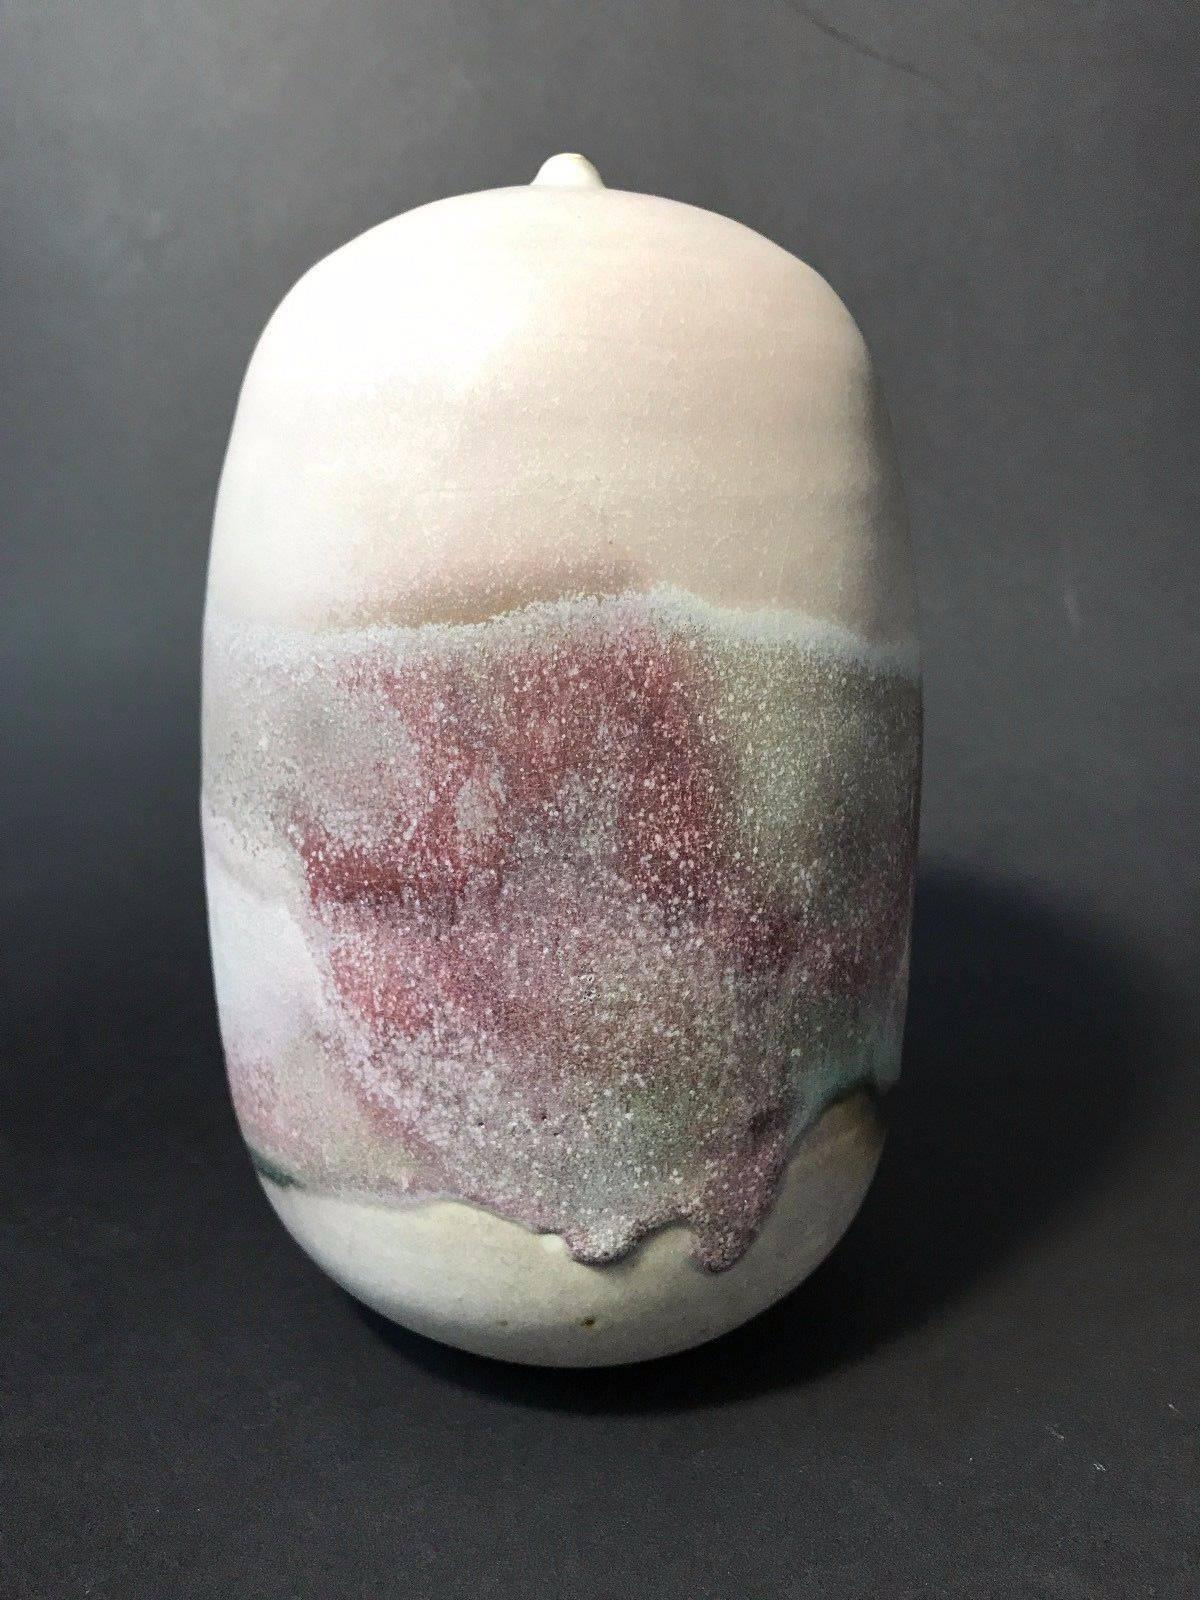 For your consideration is a ceramic moon pot with rattle, sculpture by ceramic artist Toshiko Takaezu. In excellent condition.

Dimensions are height 8